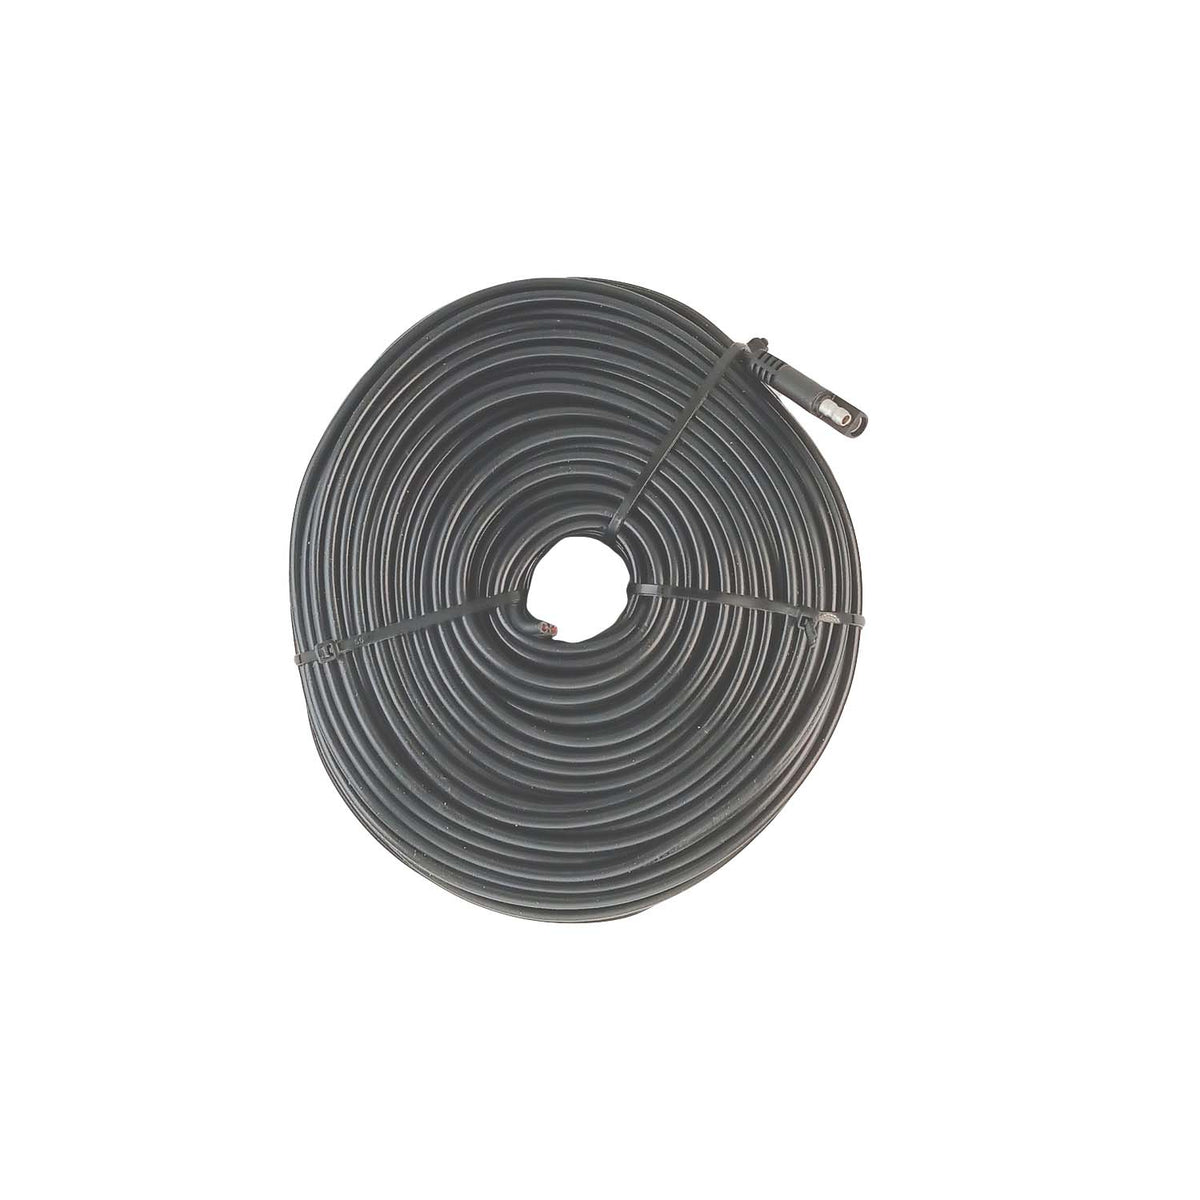 Hot Shot Satellite Dish Heater Cable, Low Voltage, OEM,16-2, 100 ft.